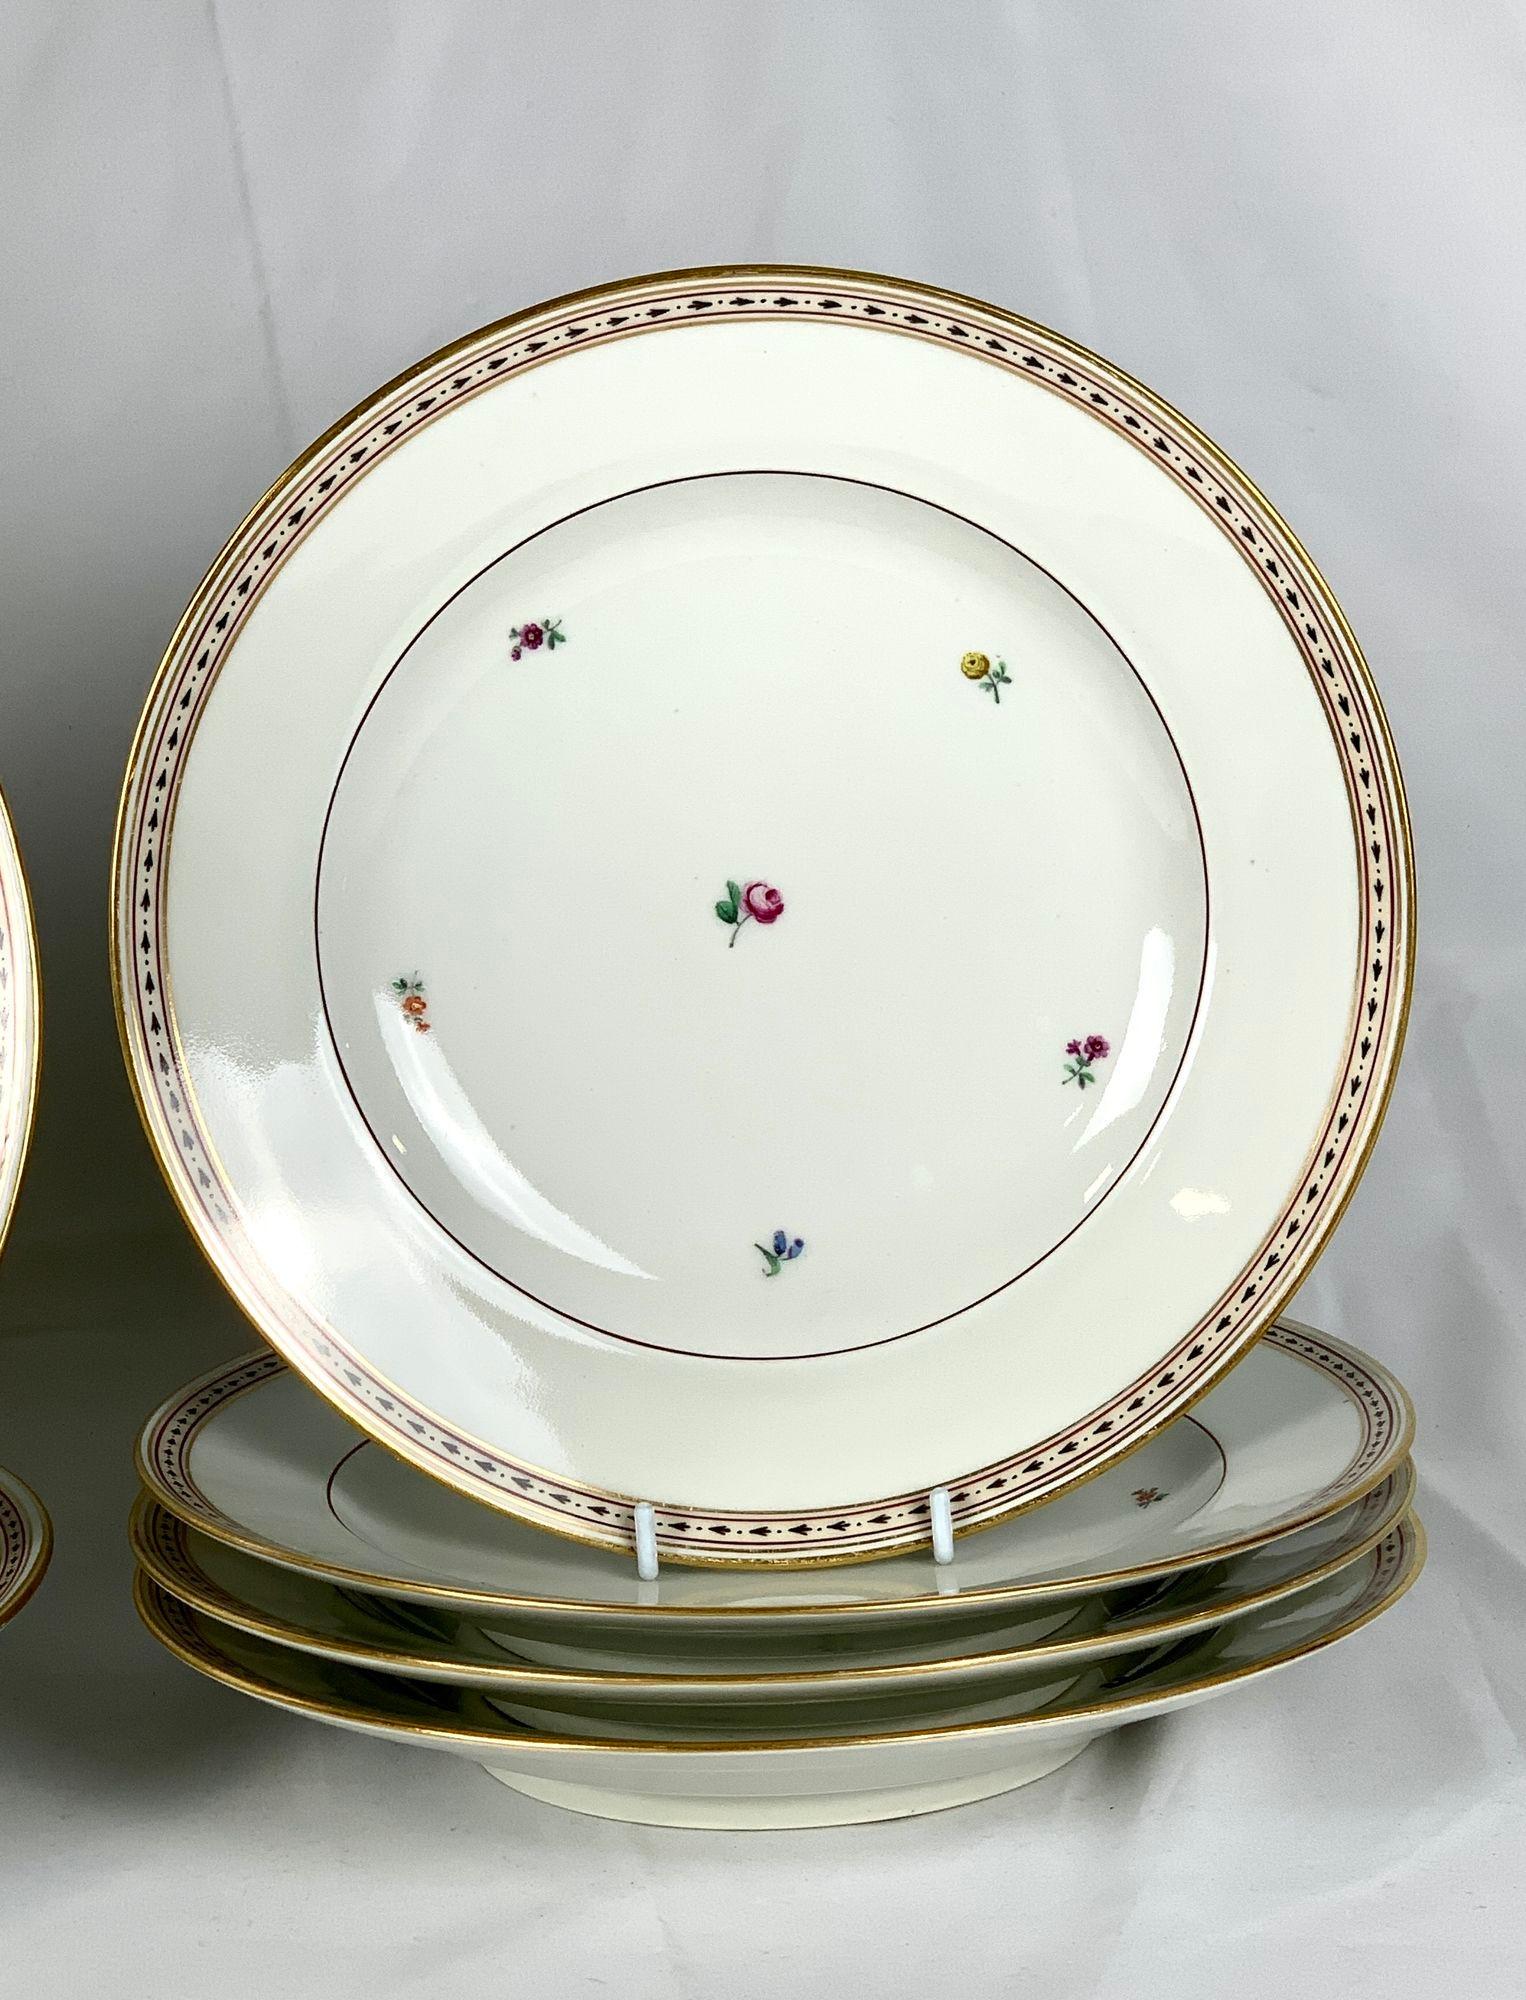 Set of 4 Dinner 4 Soup Dishes 2 Chargers 18th Century Imperial Vienna Porcelain For Sale 1